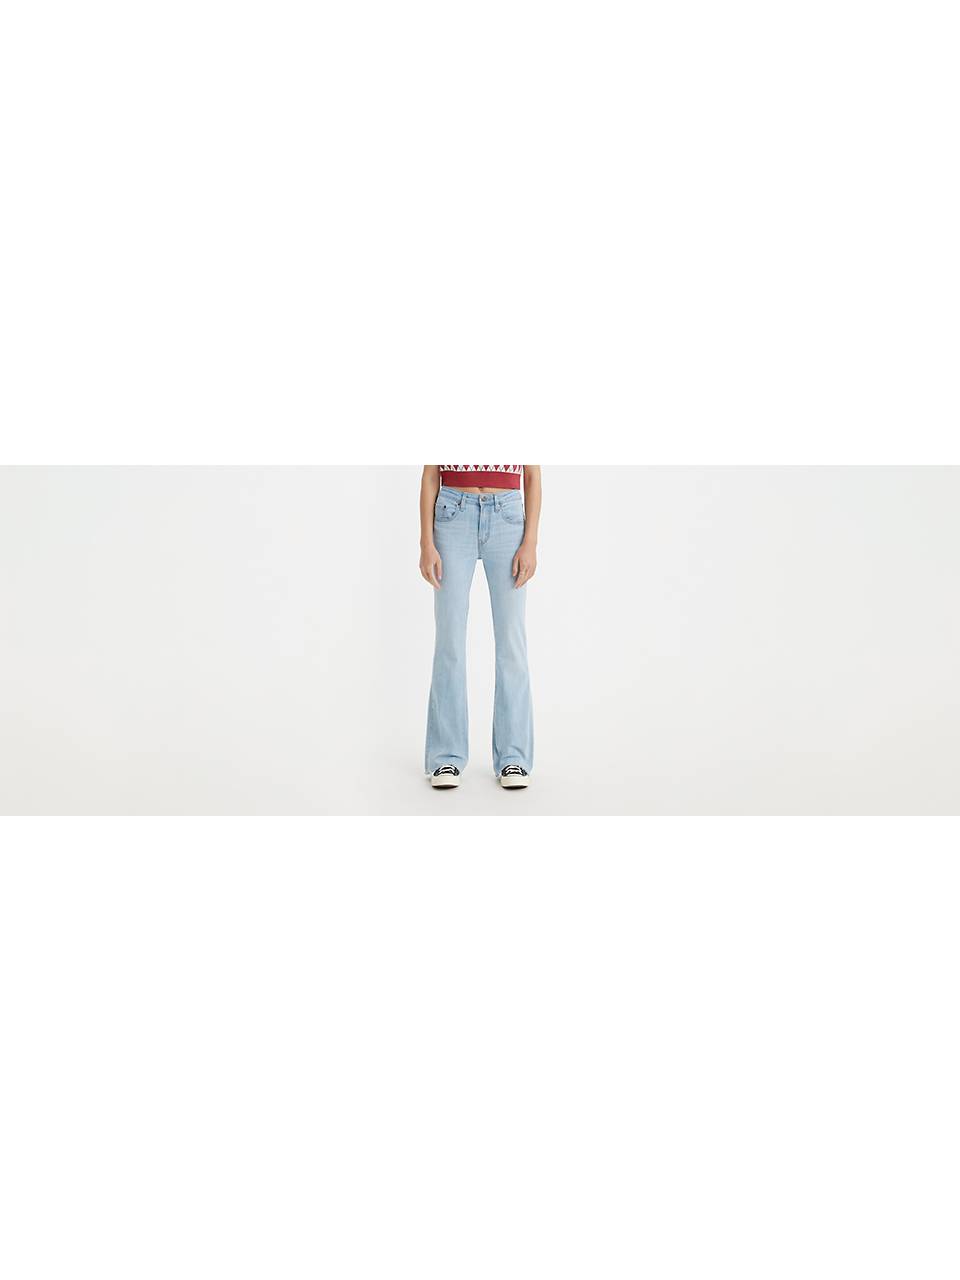 Women's High Waisted Jeans - Shop High Rise Jeans for Women | Levi’s® US